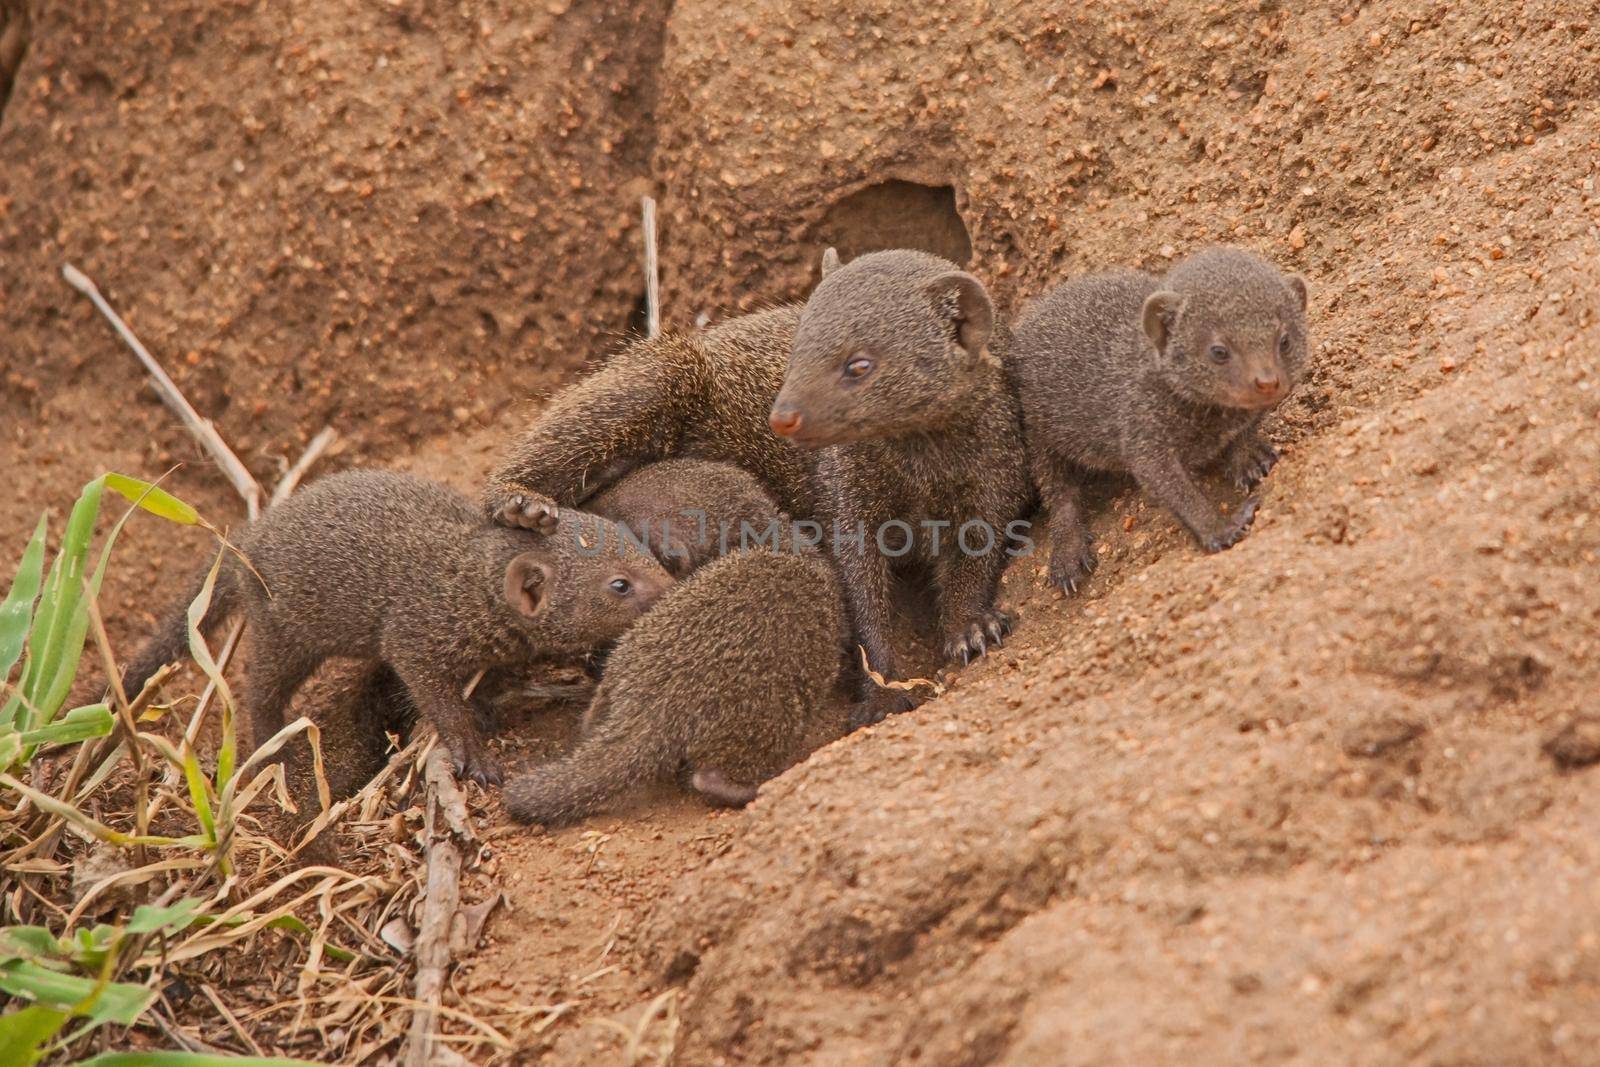 Dwarf Mongoose (Helogale parvula) mother with babies 13825 by kobus_peche